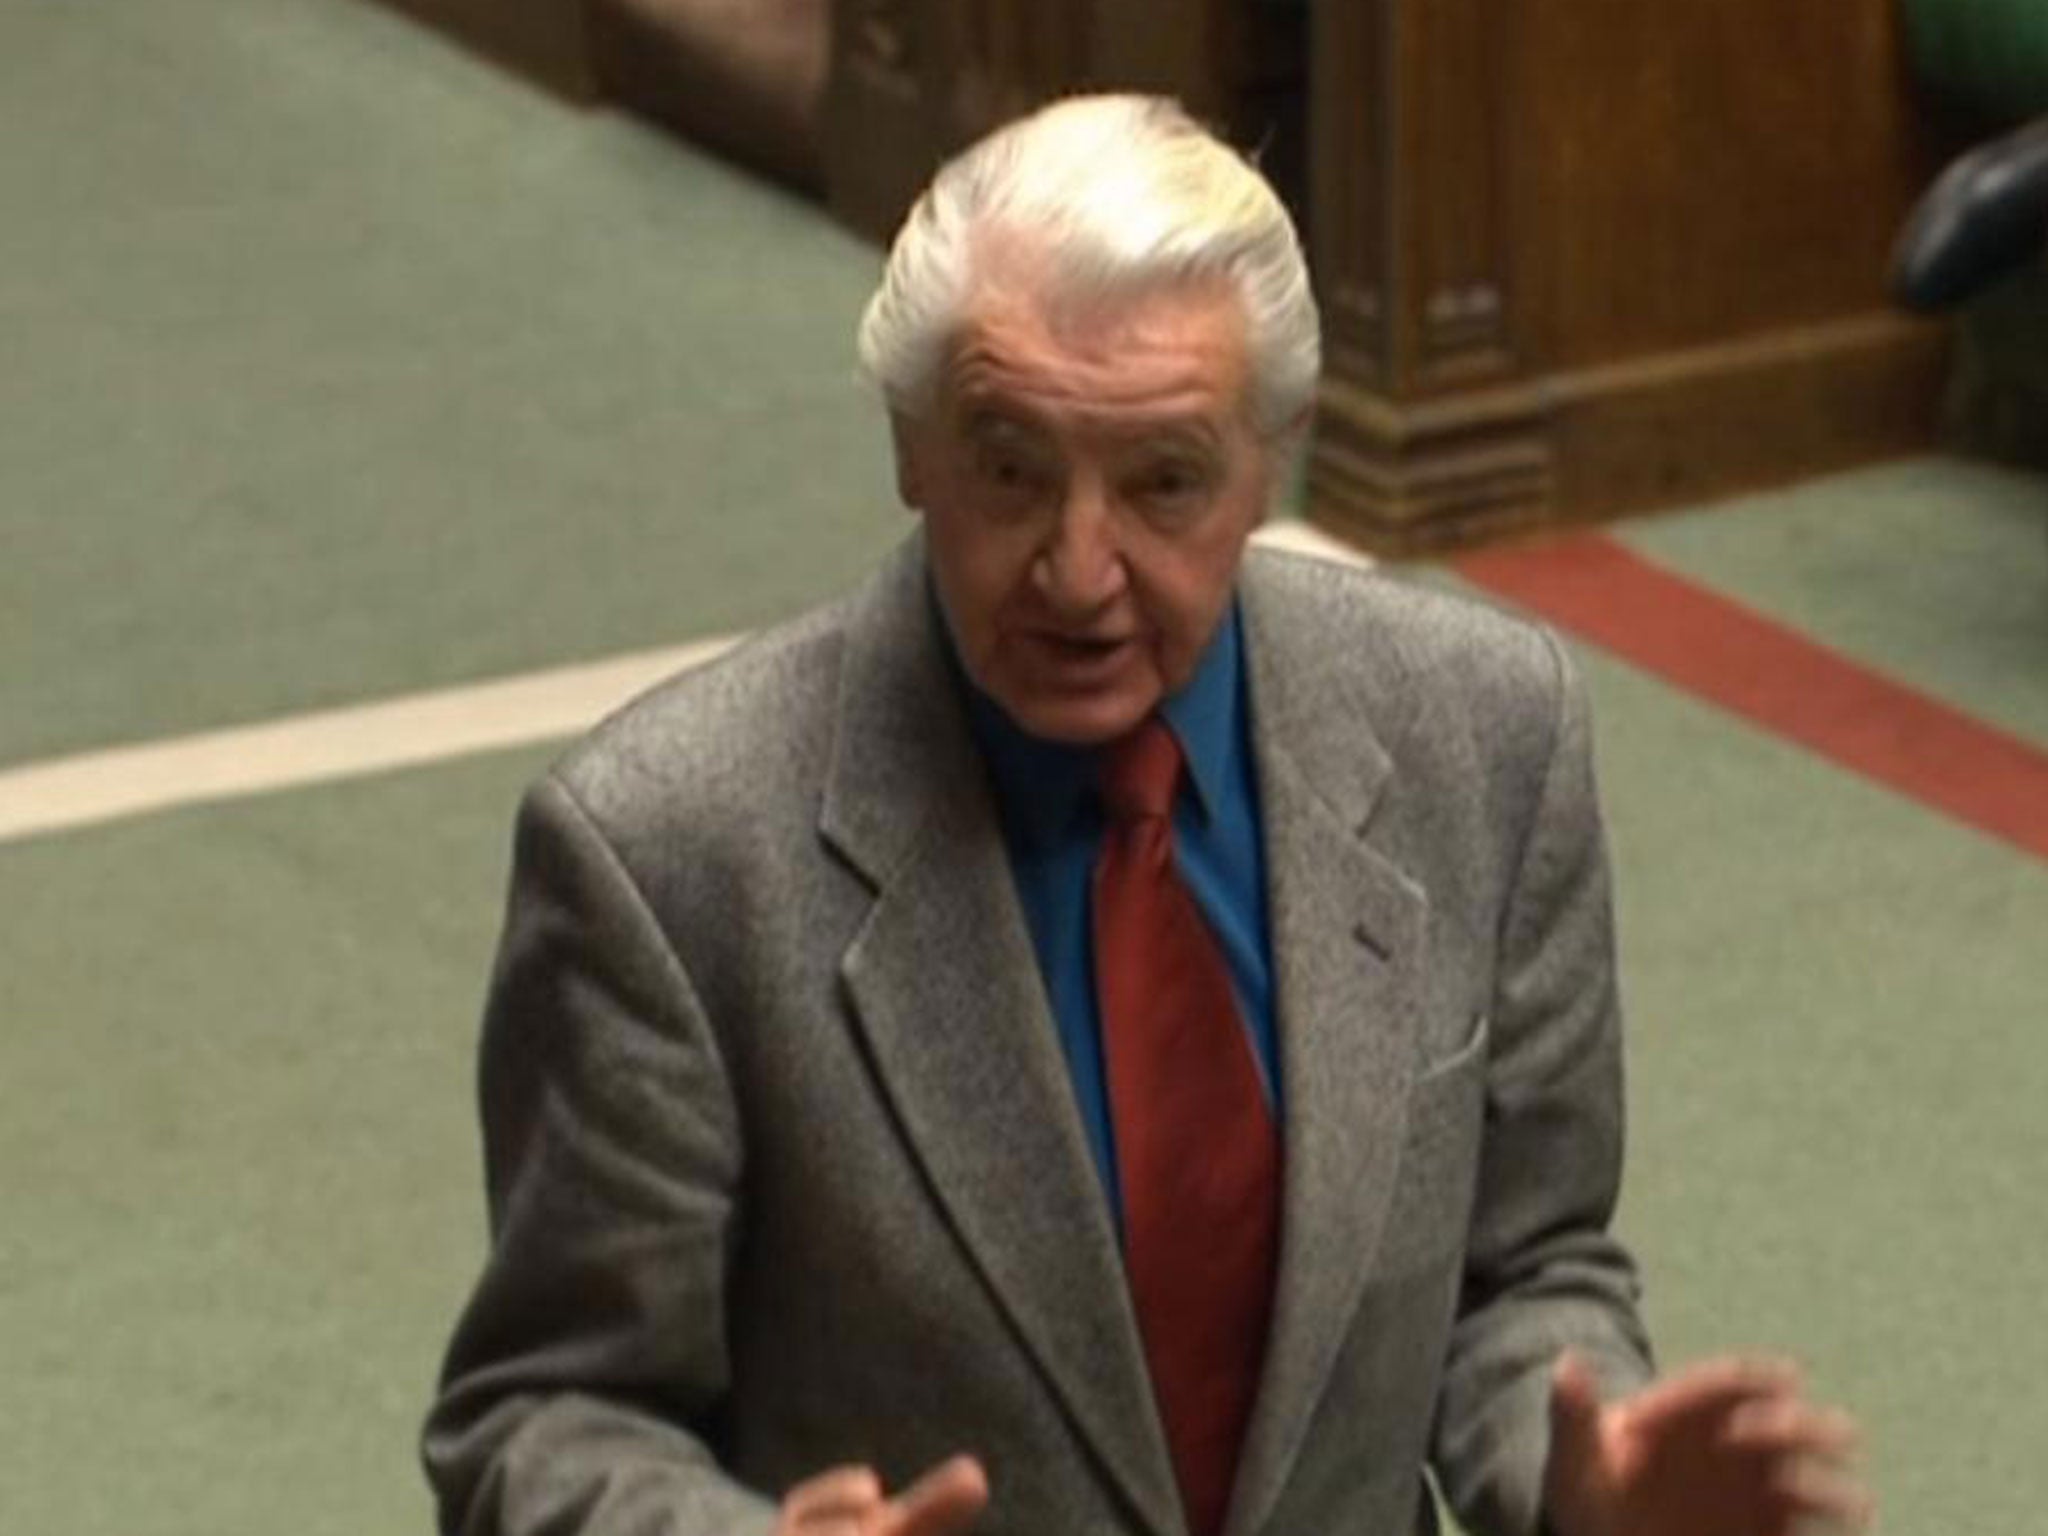 Dennis Skinner told the House what he thought about Ukip